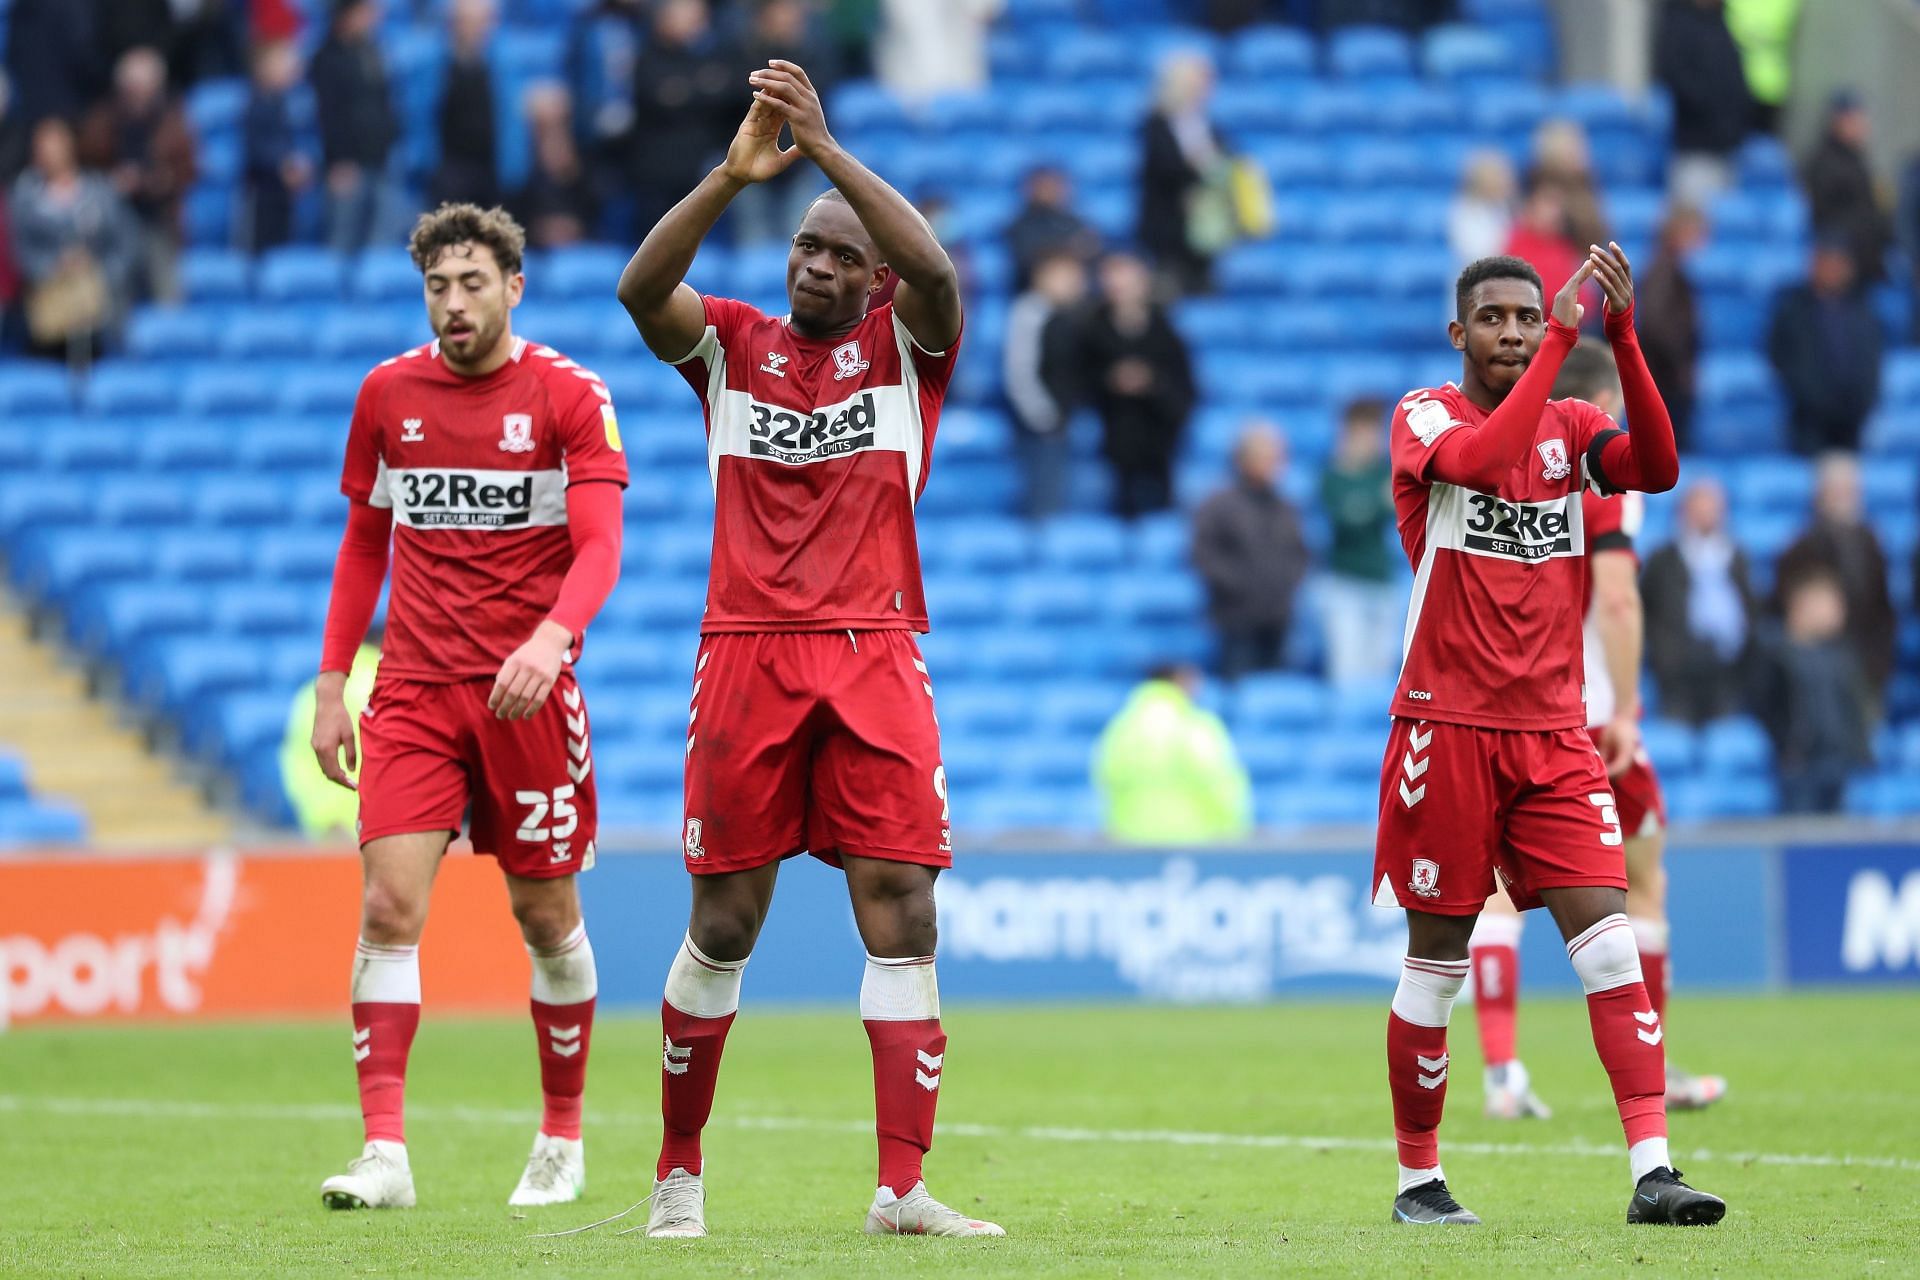 Middlesbrough are looking to climb up the EFL Championship table